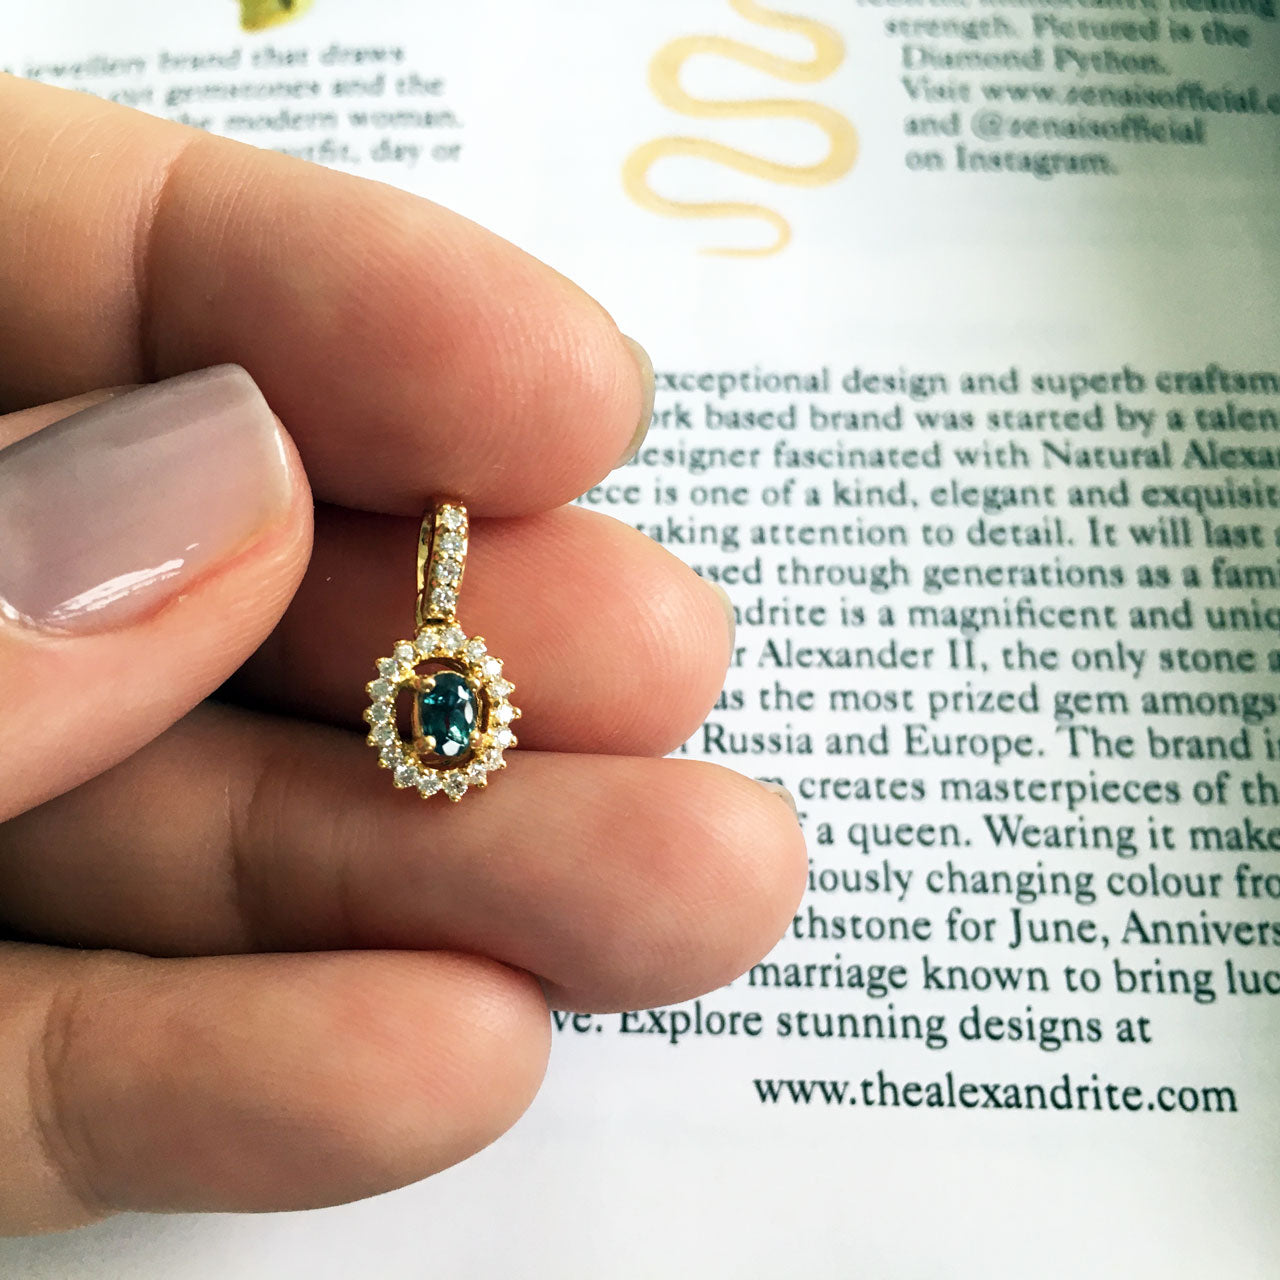 Close-up of a 0.23ct natural alexandrite pendant in 18k yellow gold held by a person